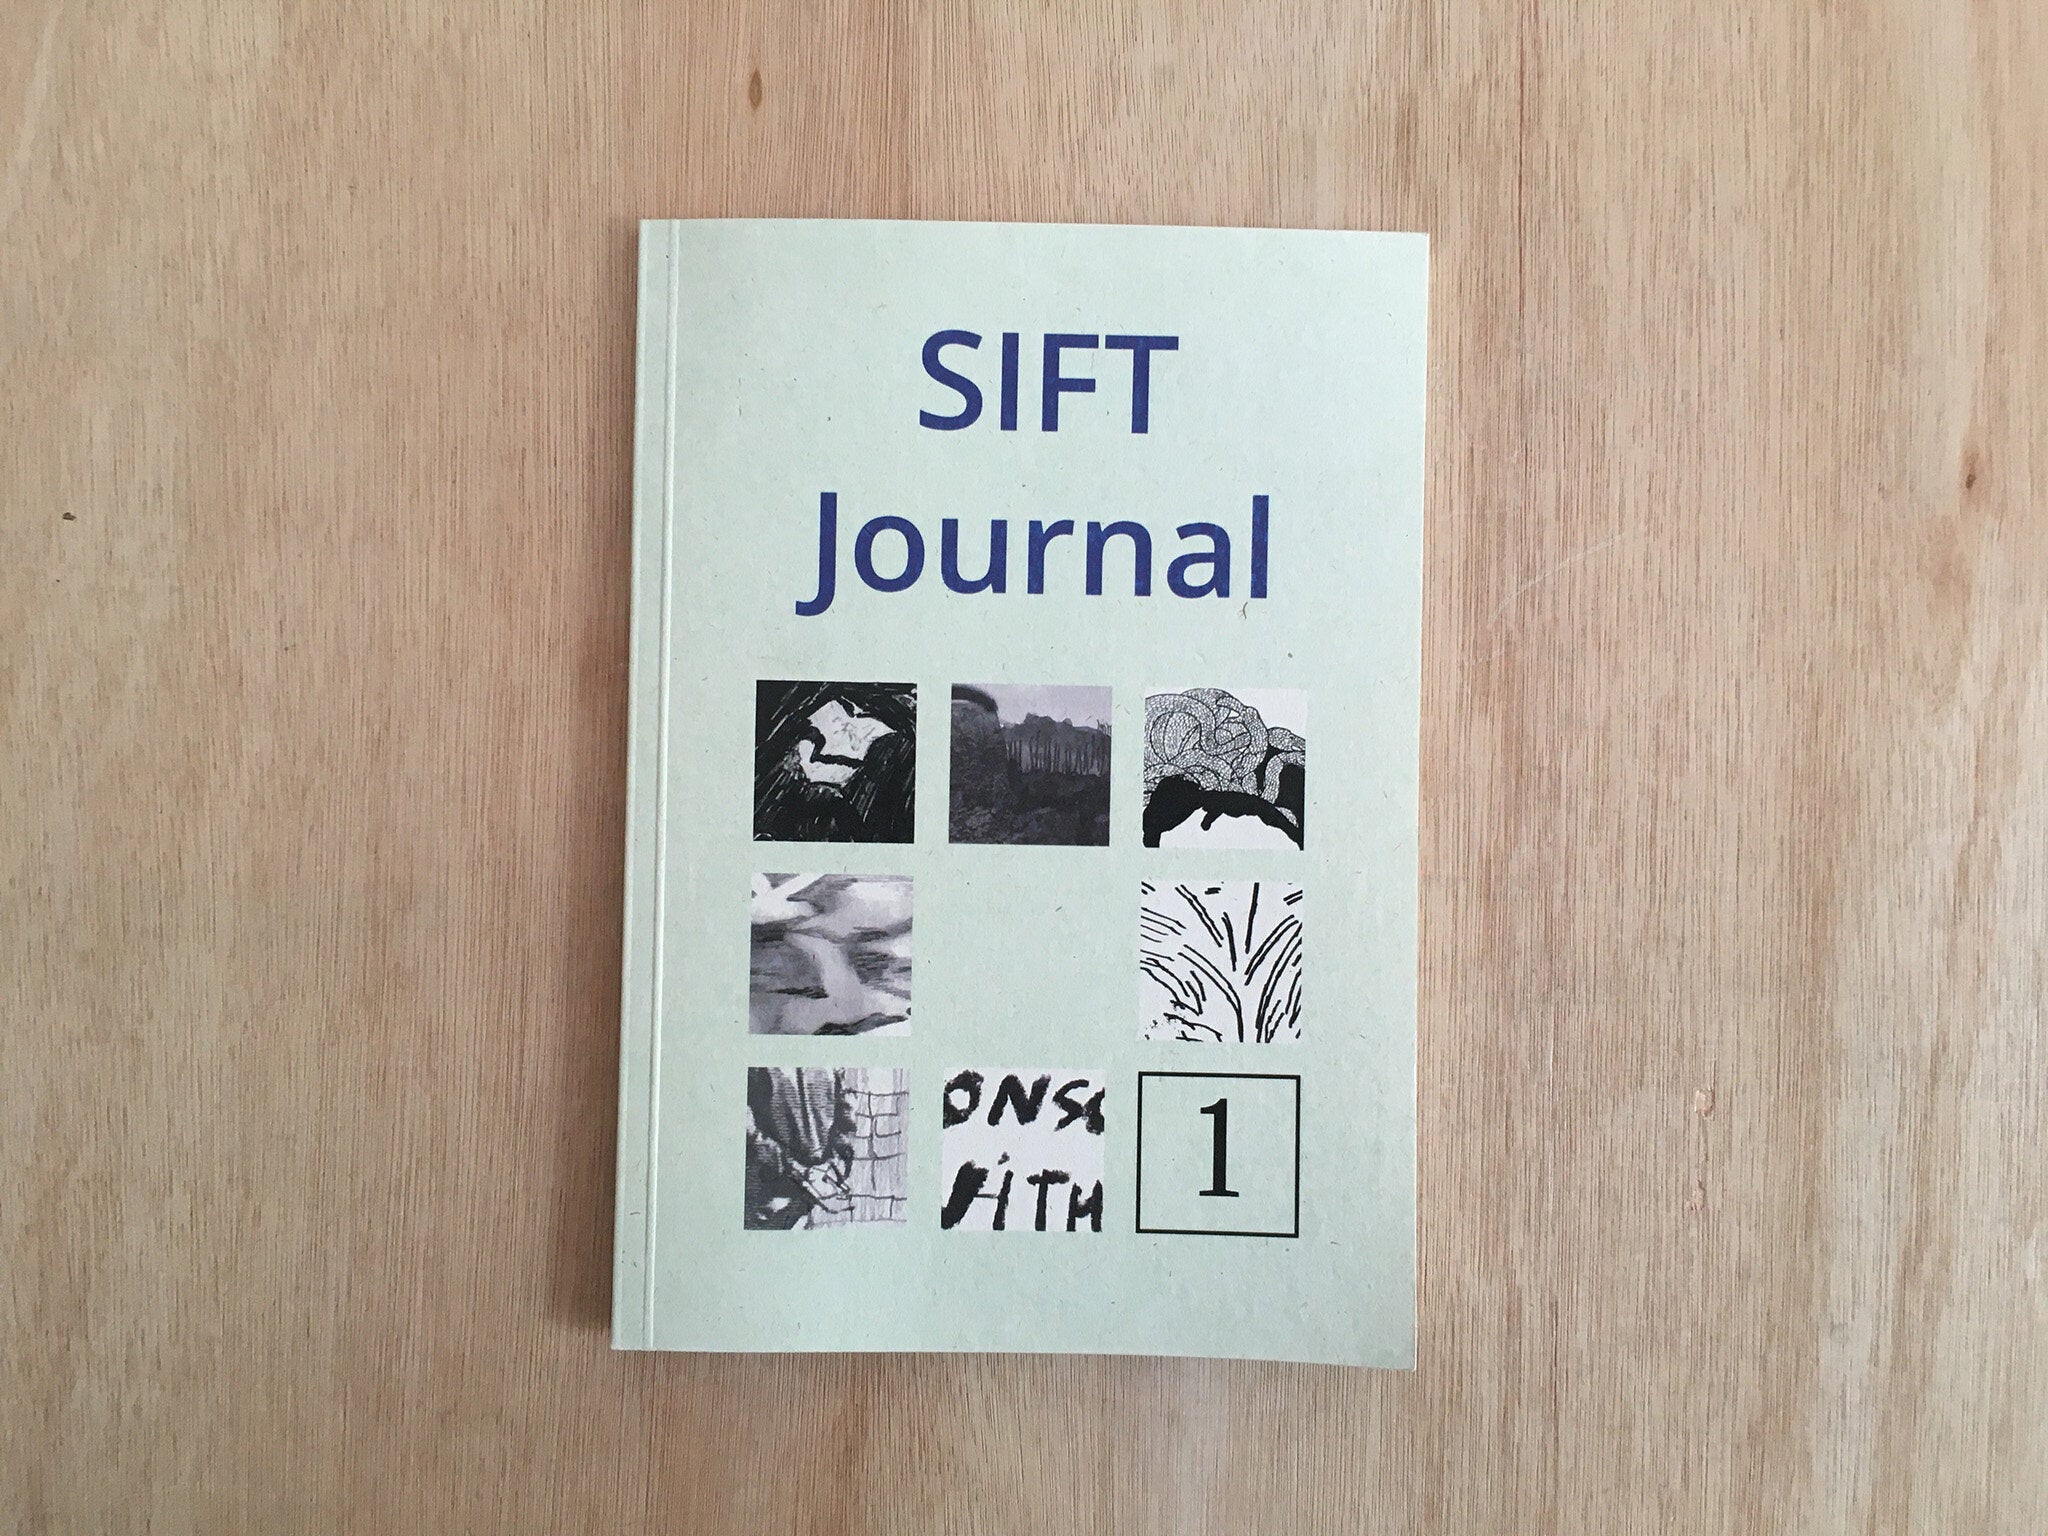 SIFT JOURNAL #1 by Various Artists